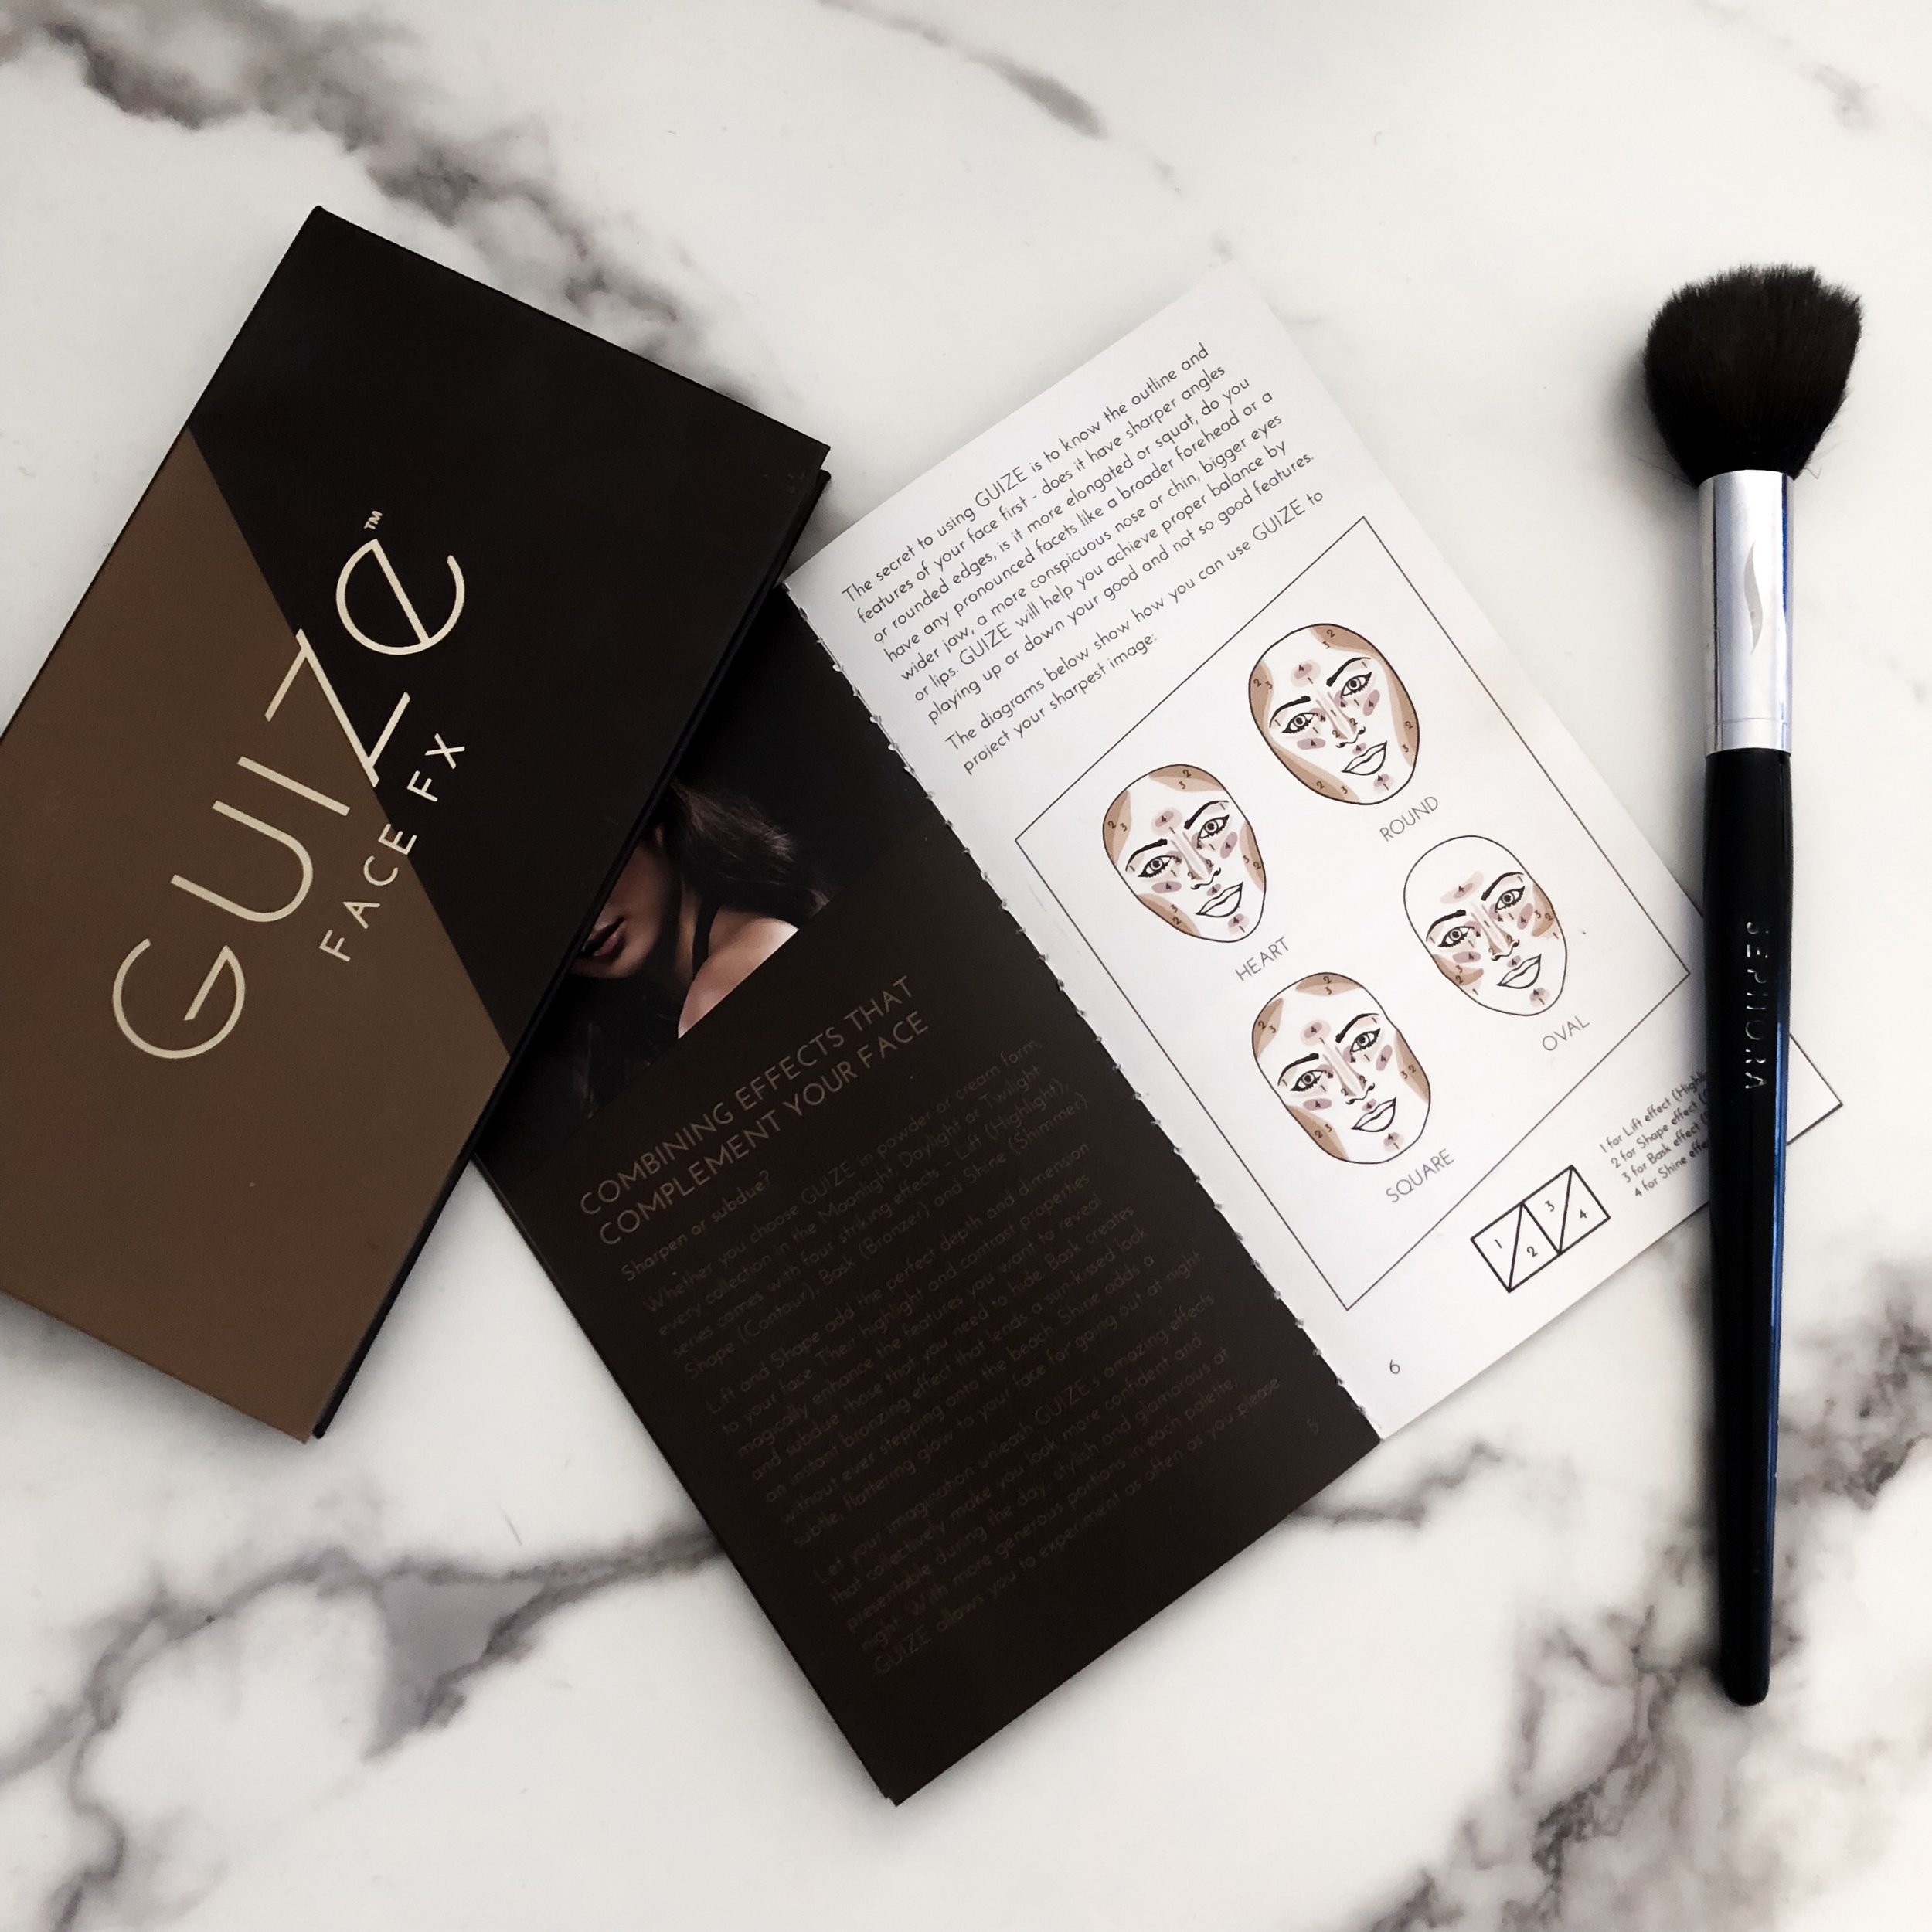 Guize Face FX Contour Palette Review Esther Santer Fashion Blog NYC Street Style Blogger Outfit OOTD Trendy Makeup Beauty Product Bronzer Highlighter Powder Brush Shopping Value $40 Radiant Glow Skin Beautiful Shades Eye Shadow  Brand Company Collab.jpg